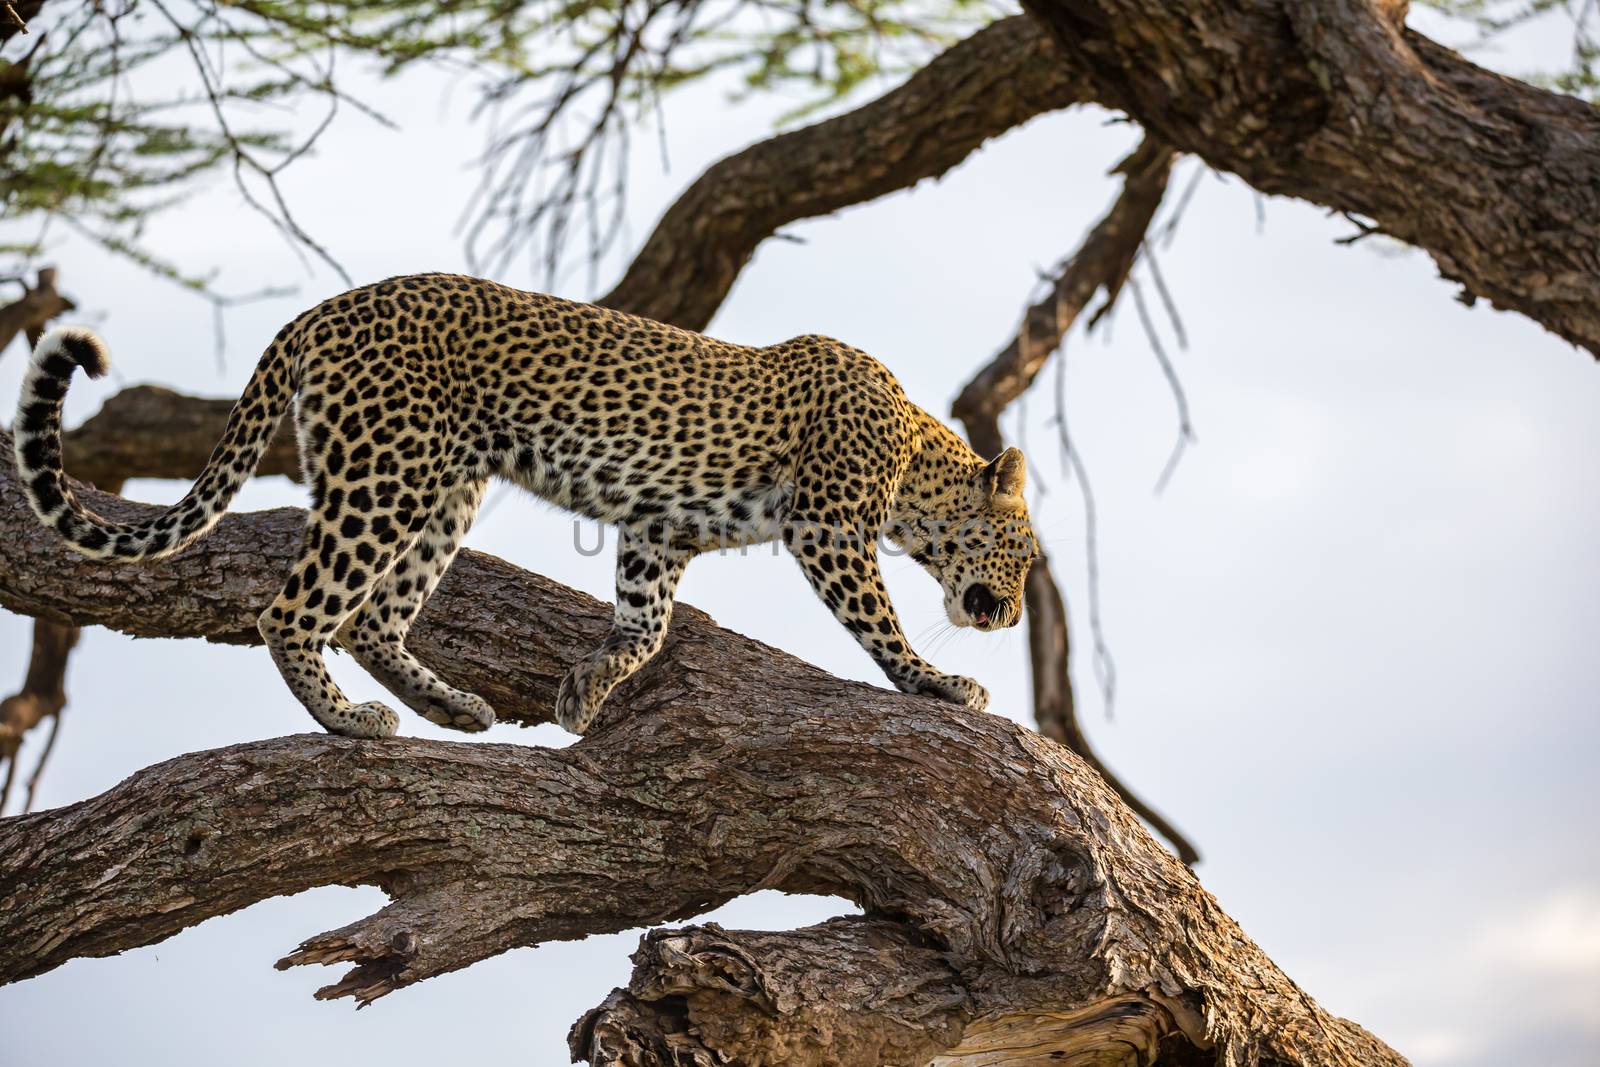 One leopard is walking up and down the tree on its branches